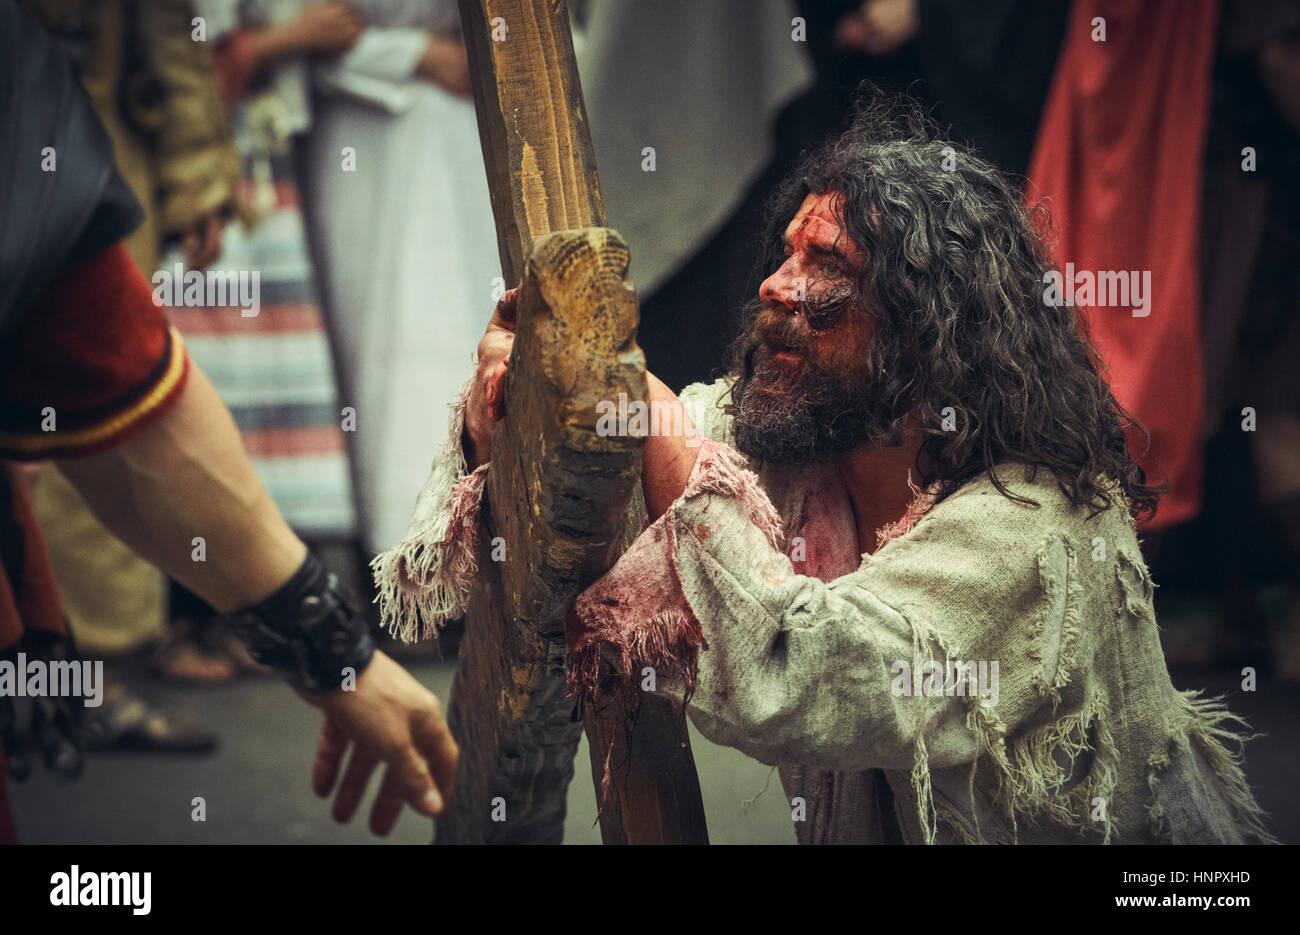 Actor plays wounded tired Jesus Christ carrying large wooden cross during the reenactment of the Way of Sorrows on April 15, 2014, Bucharest, Romania Stock Photo